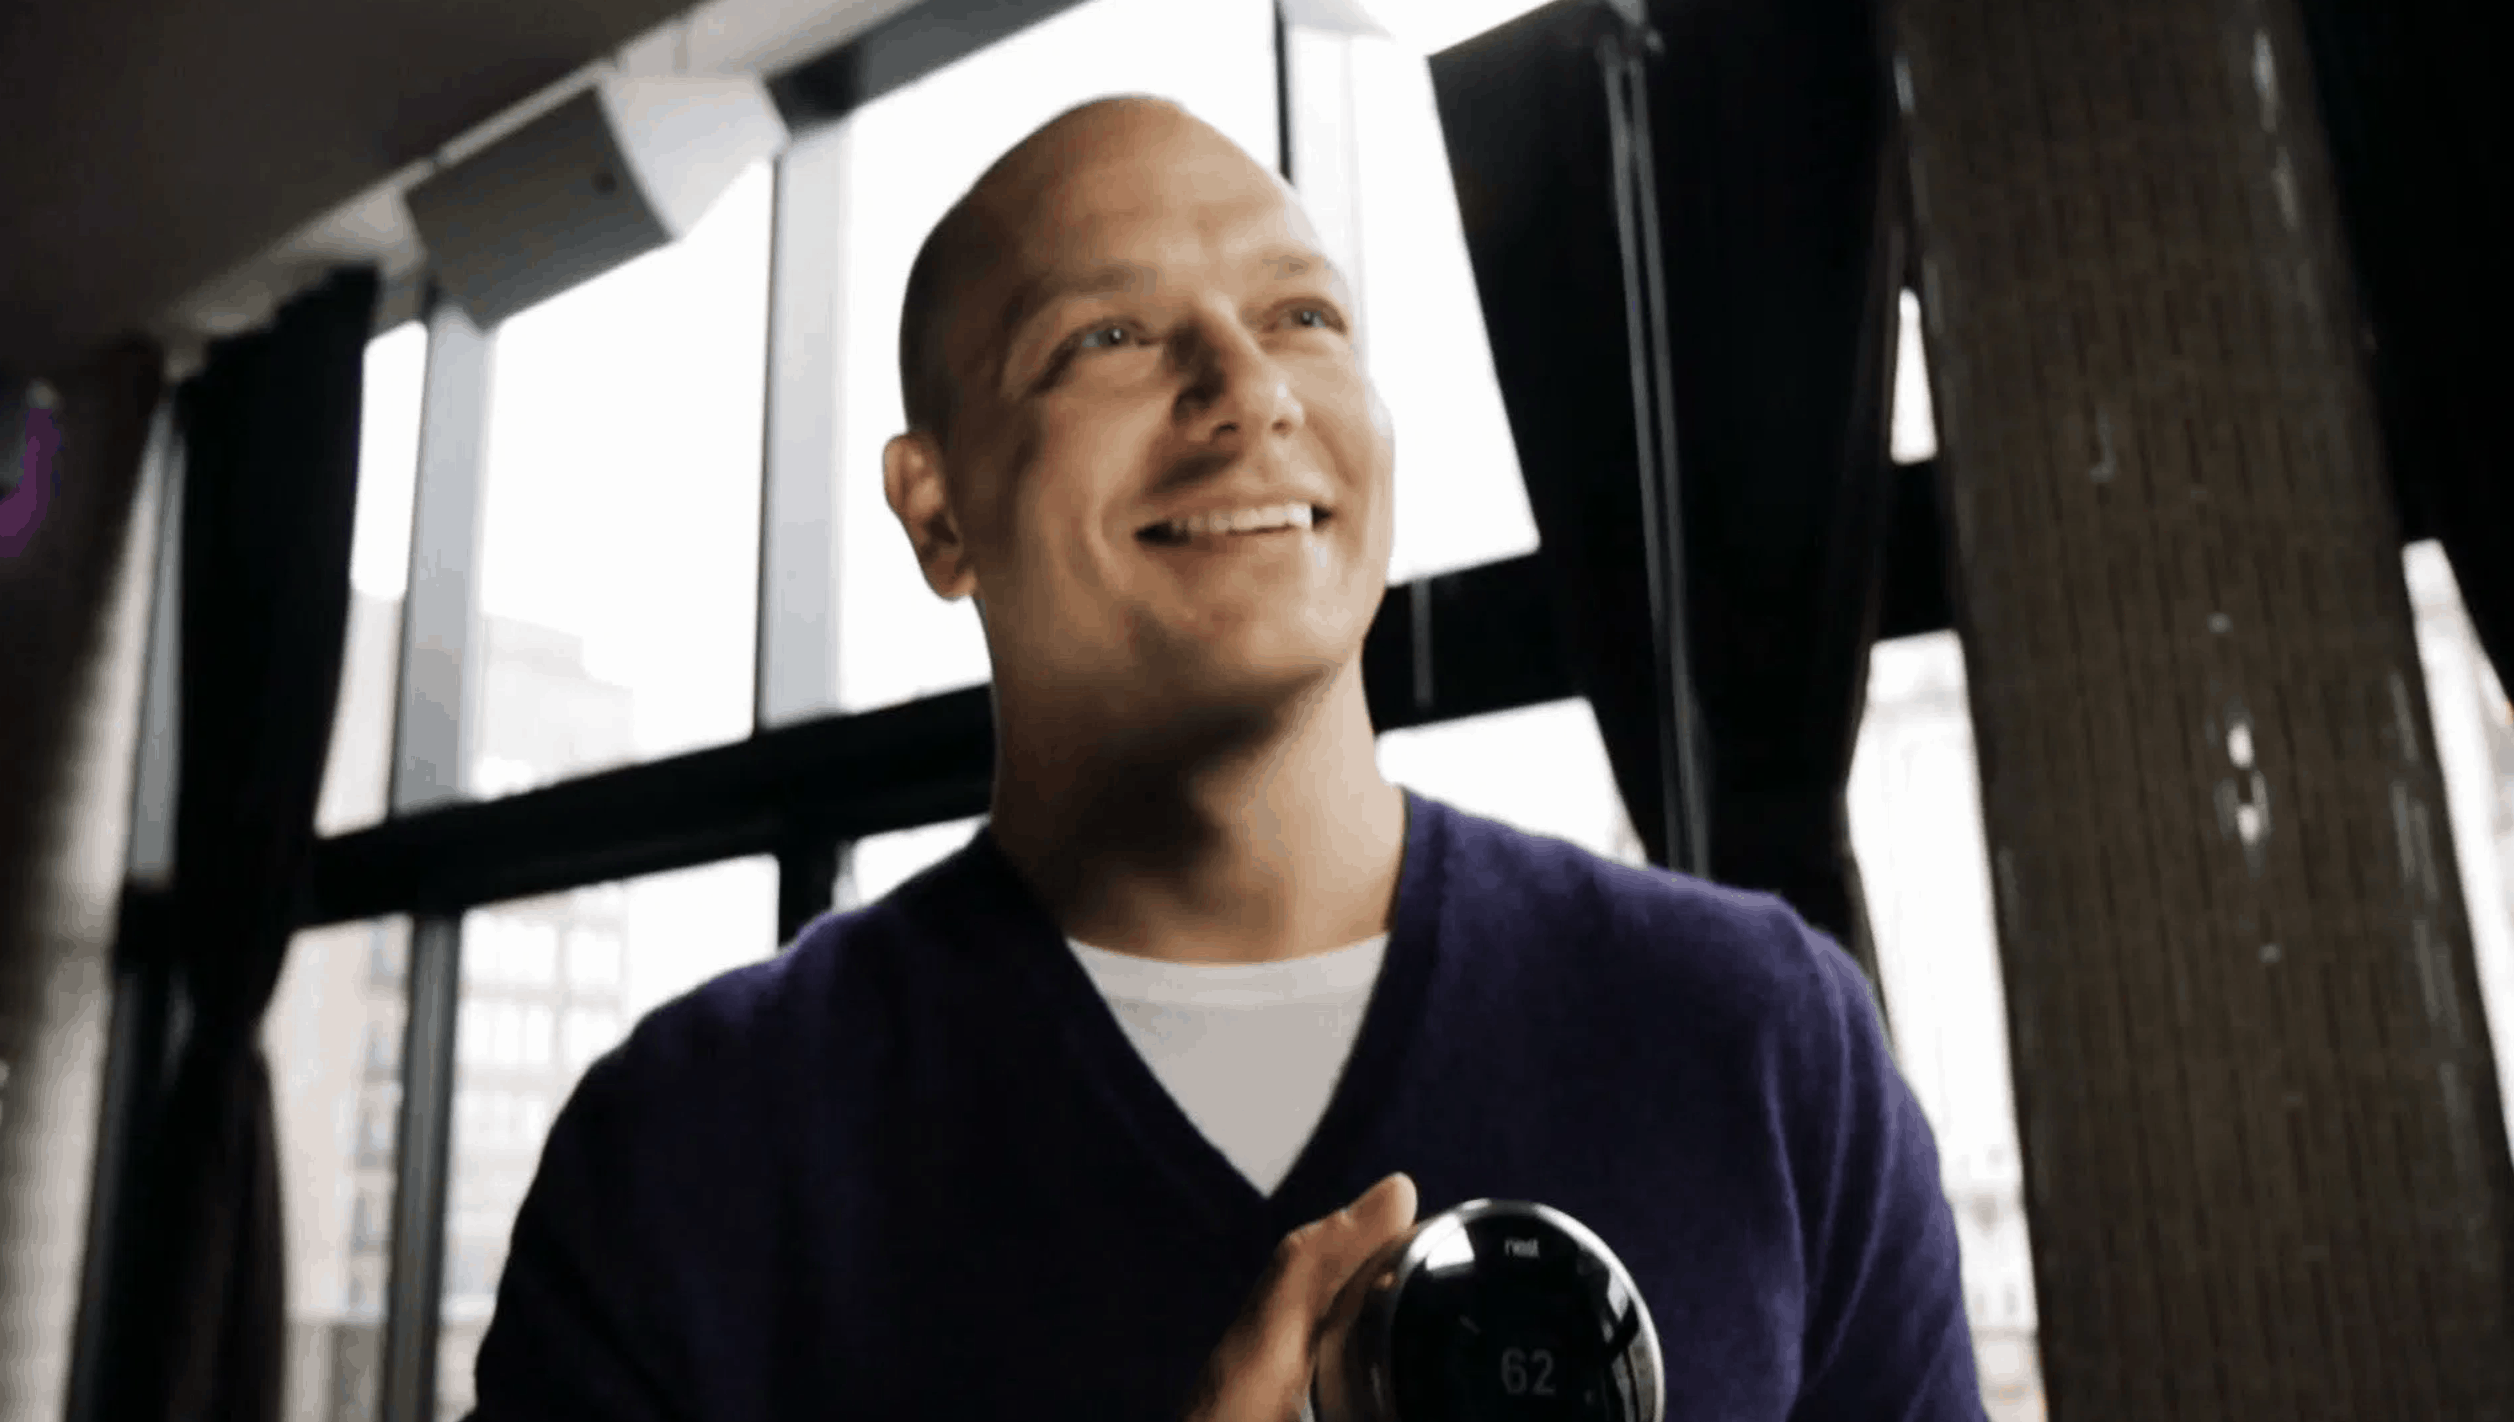 Tony Fadell Takes to Twitter to Discuss iPod Development